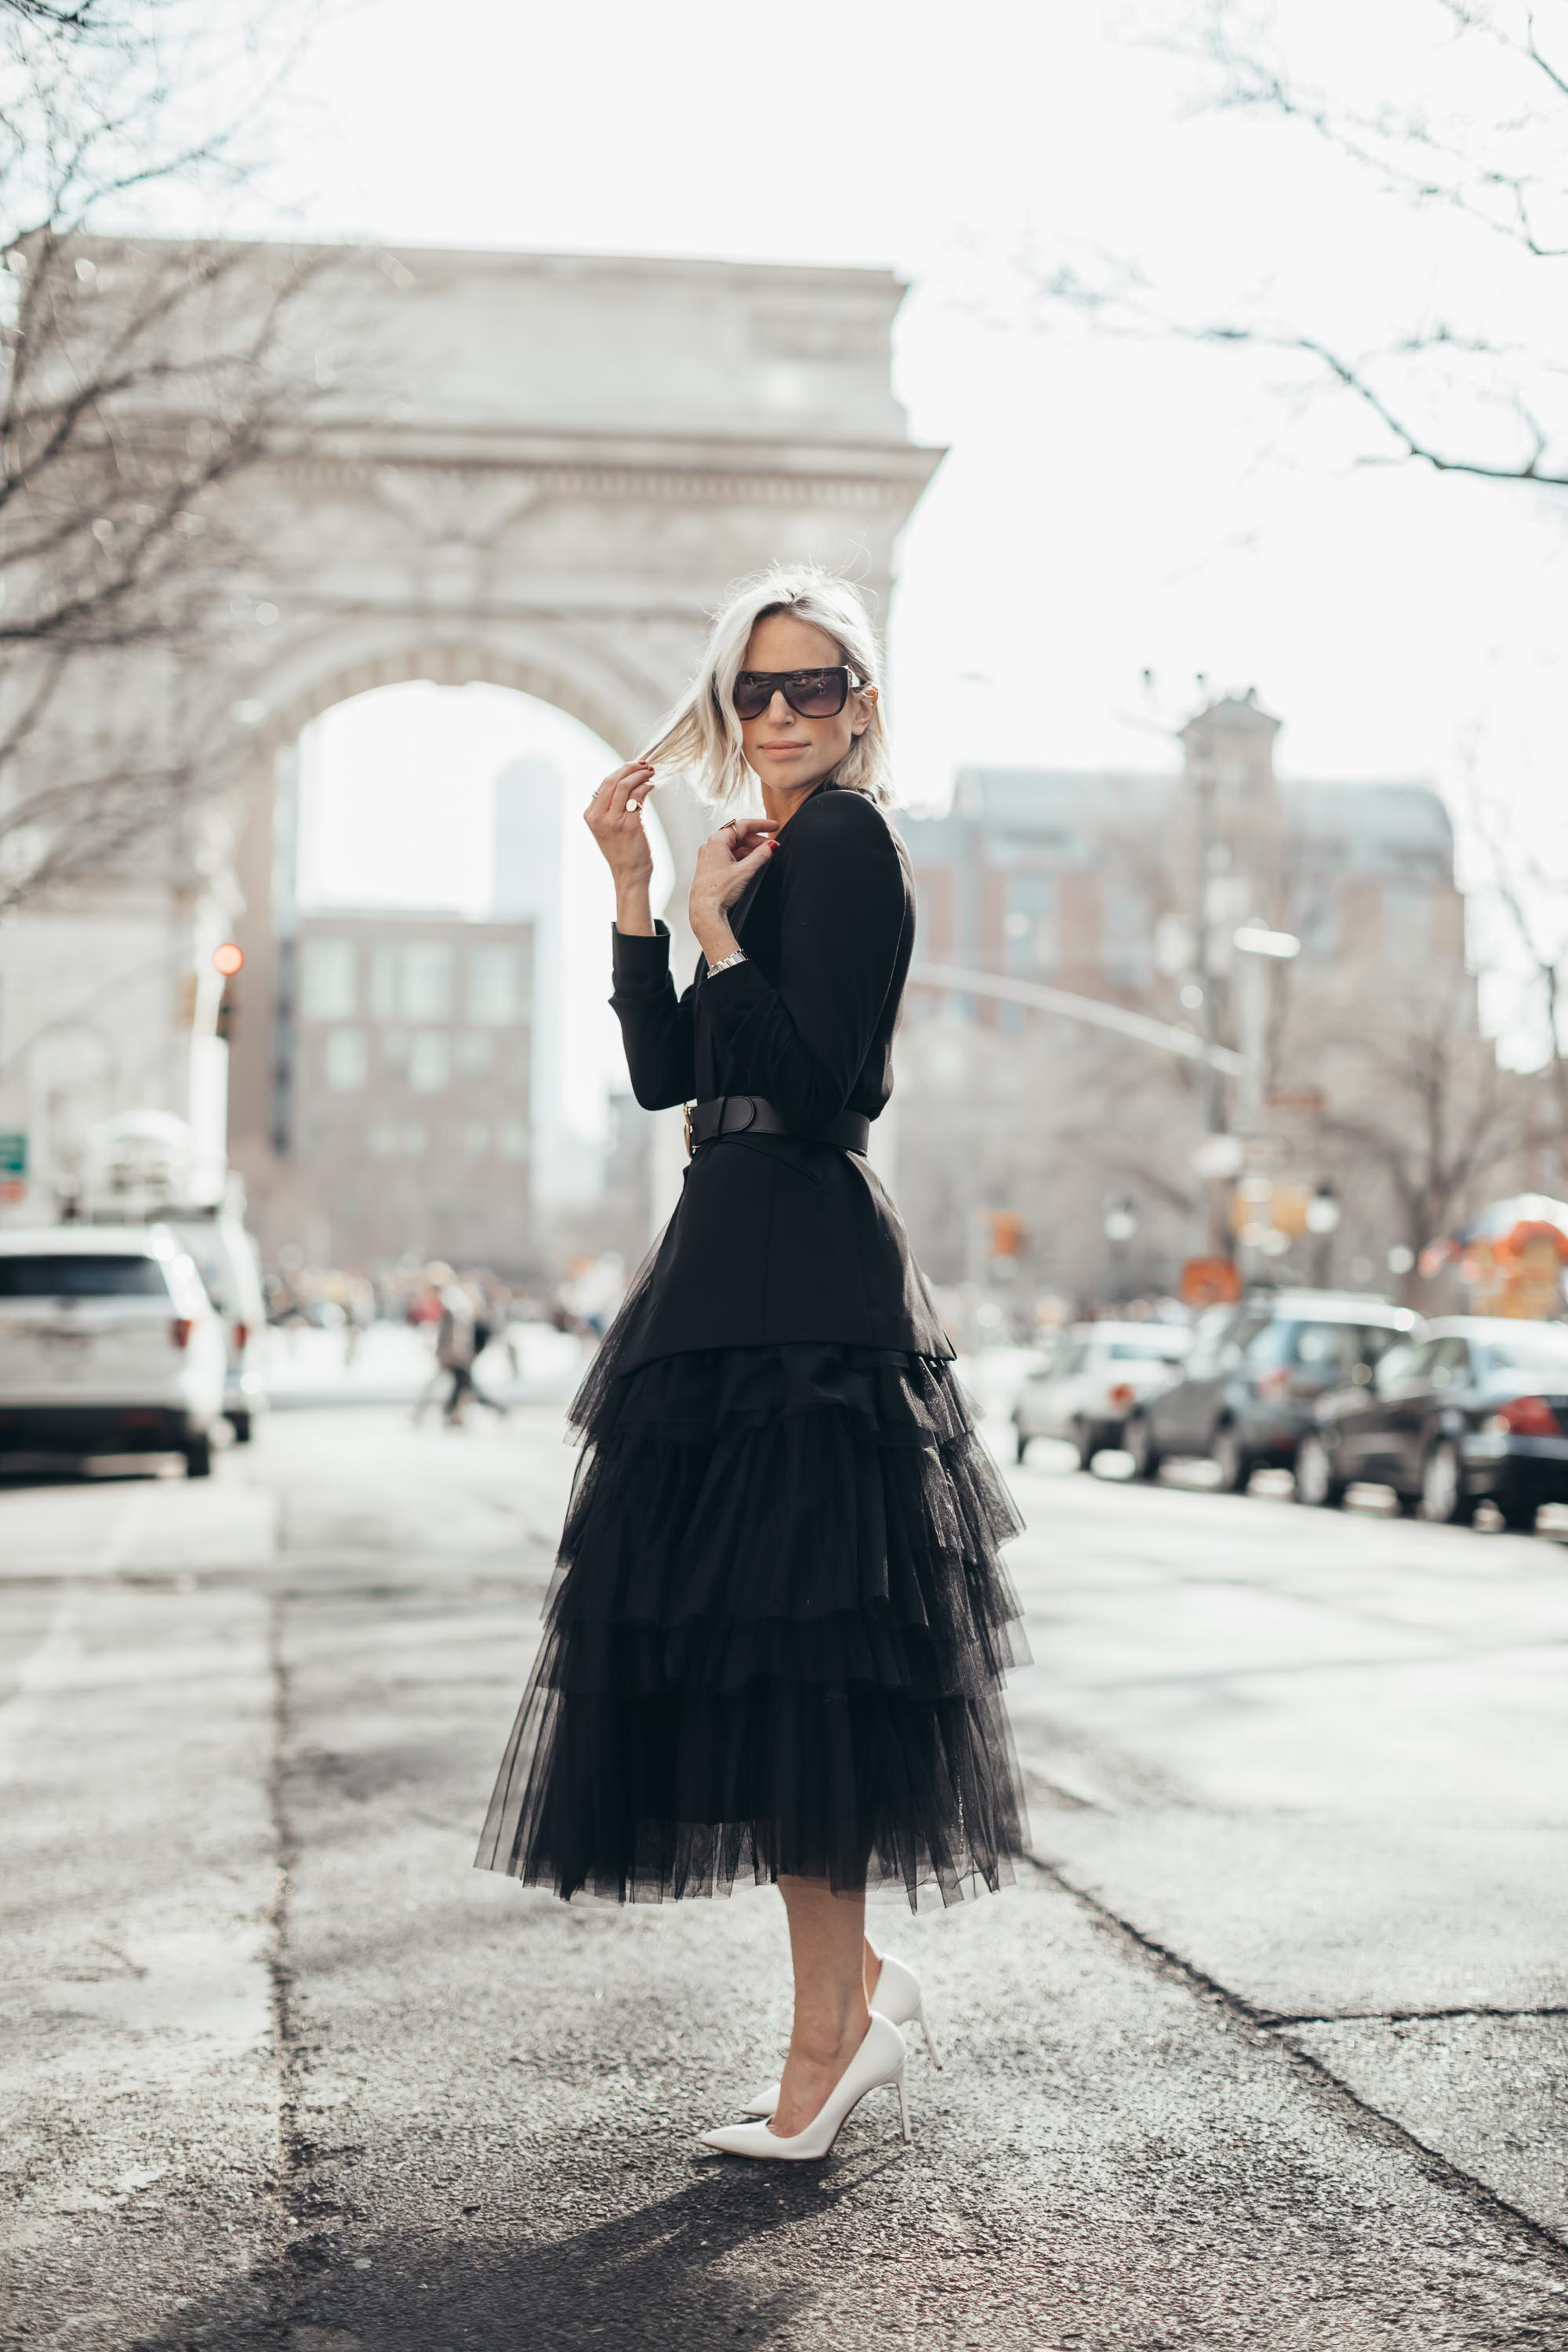 How to Style a Tulle Skirt